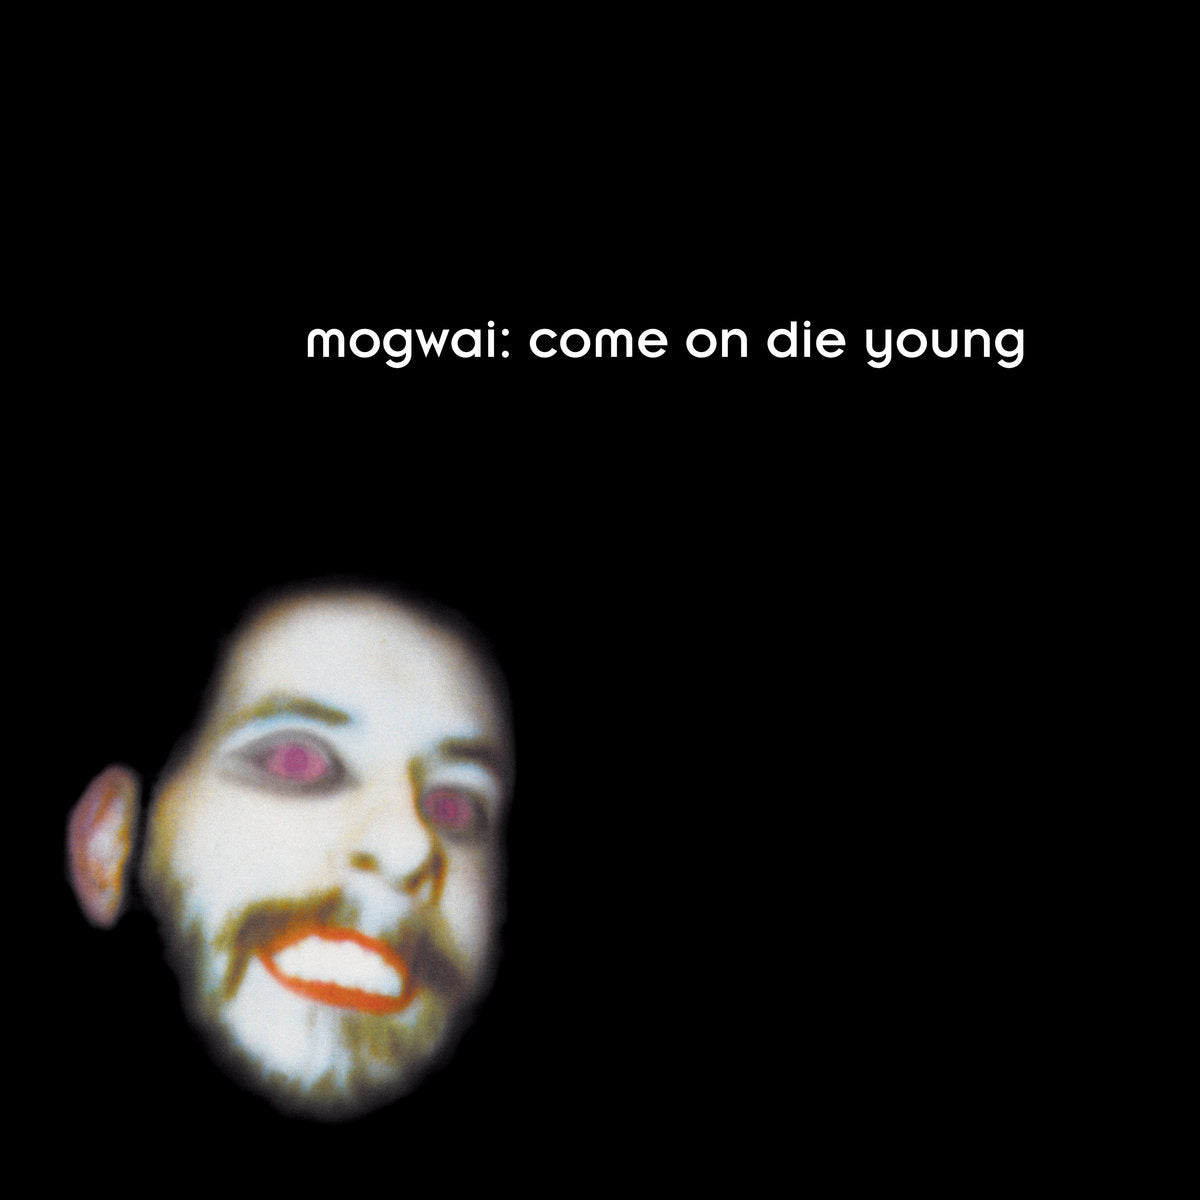 Mogwai - Come On Die Young "Reissue" (Remastered on Double White Vinyl)